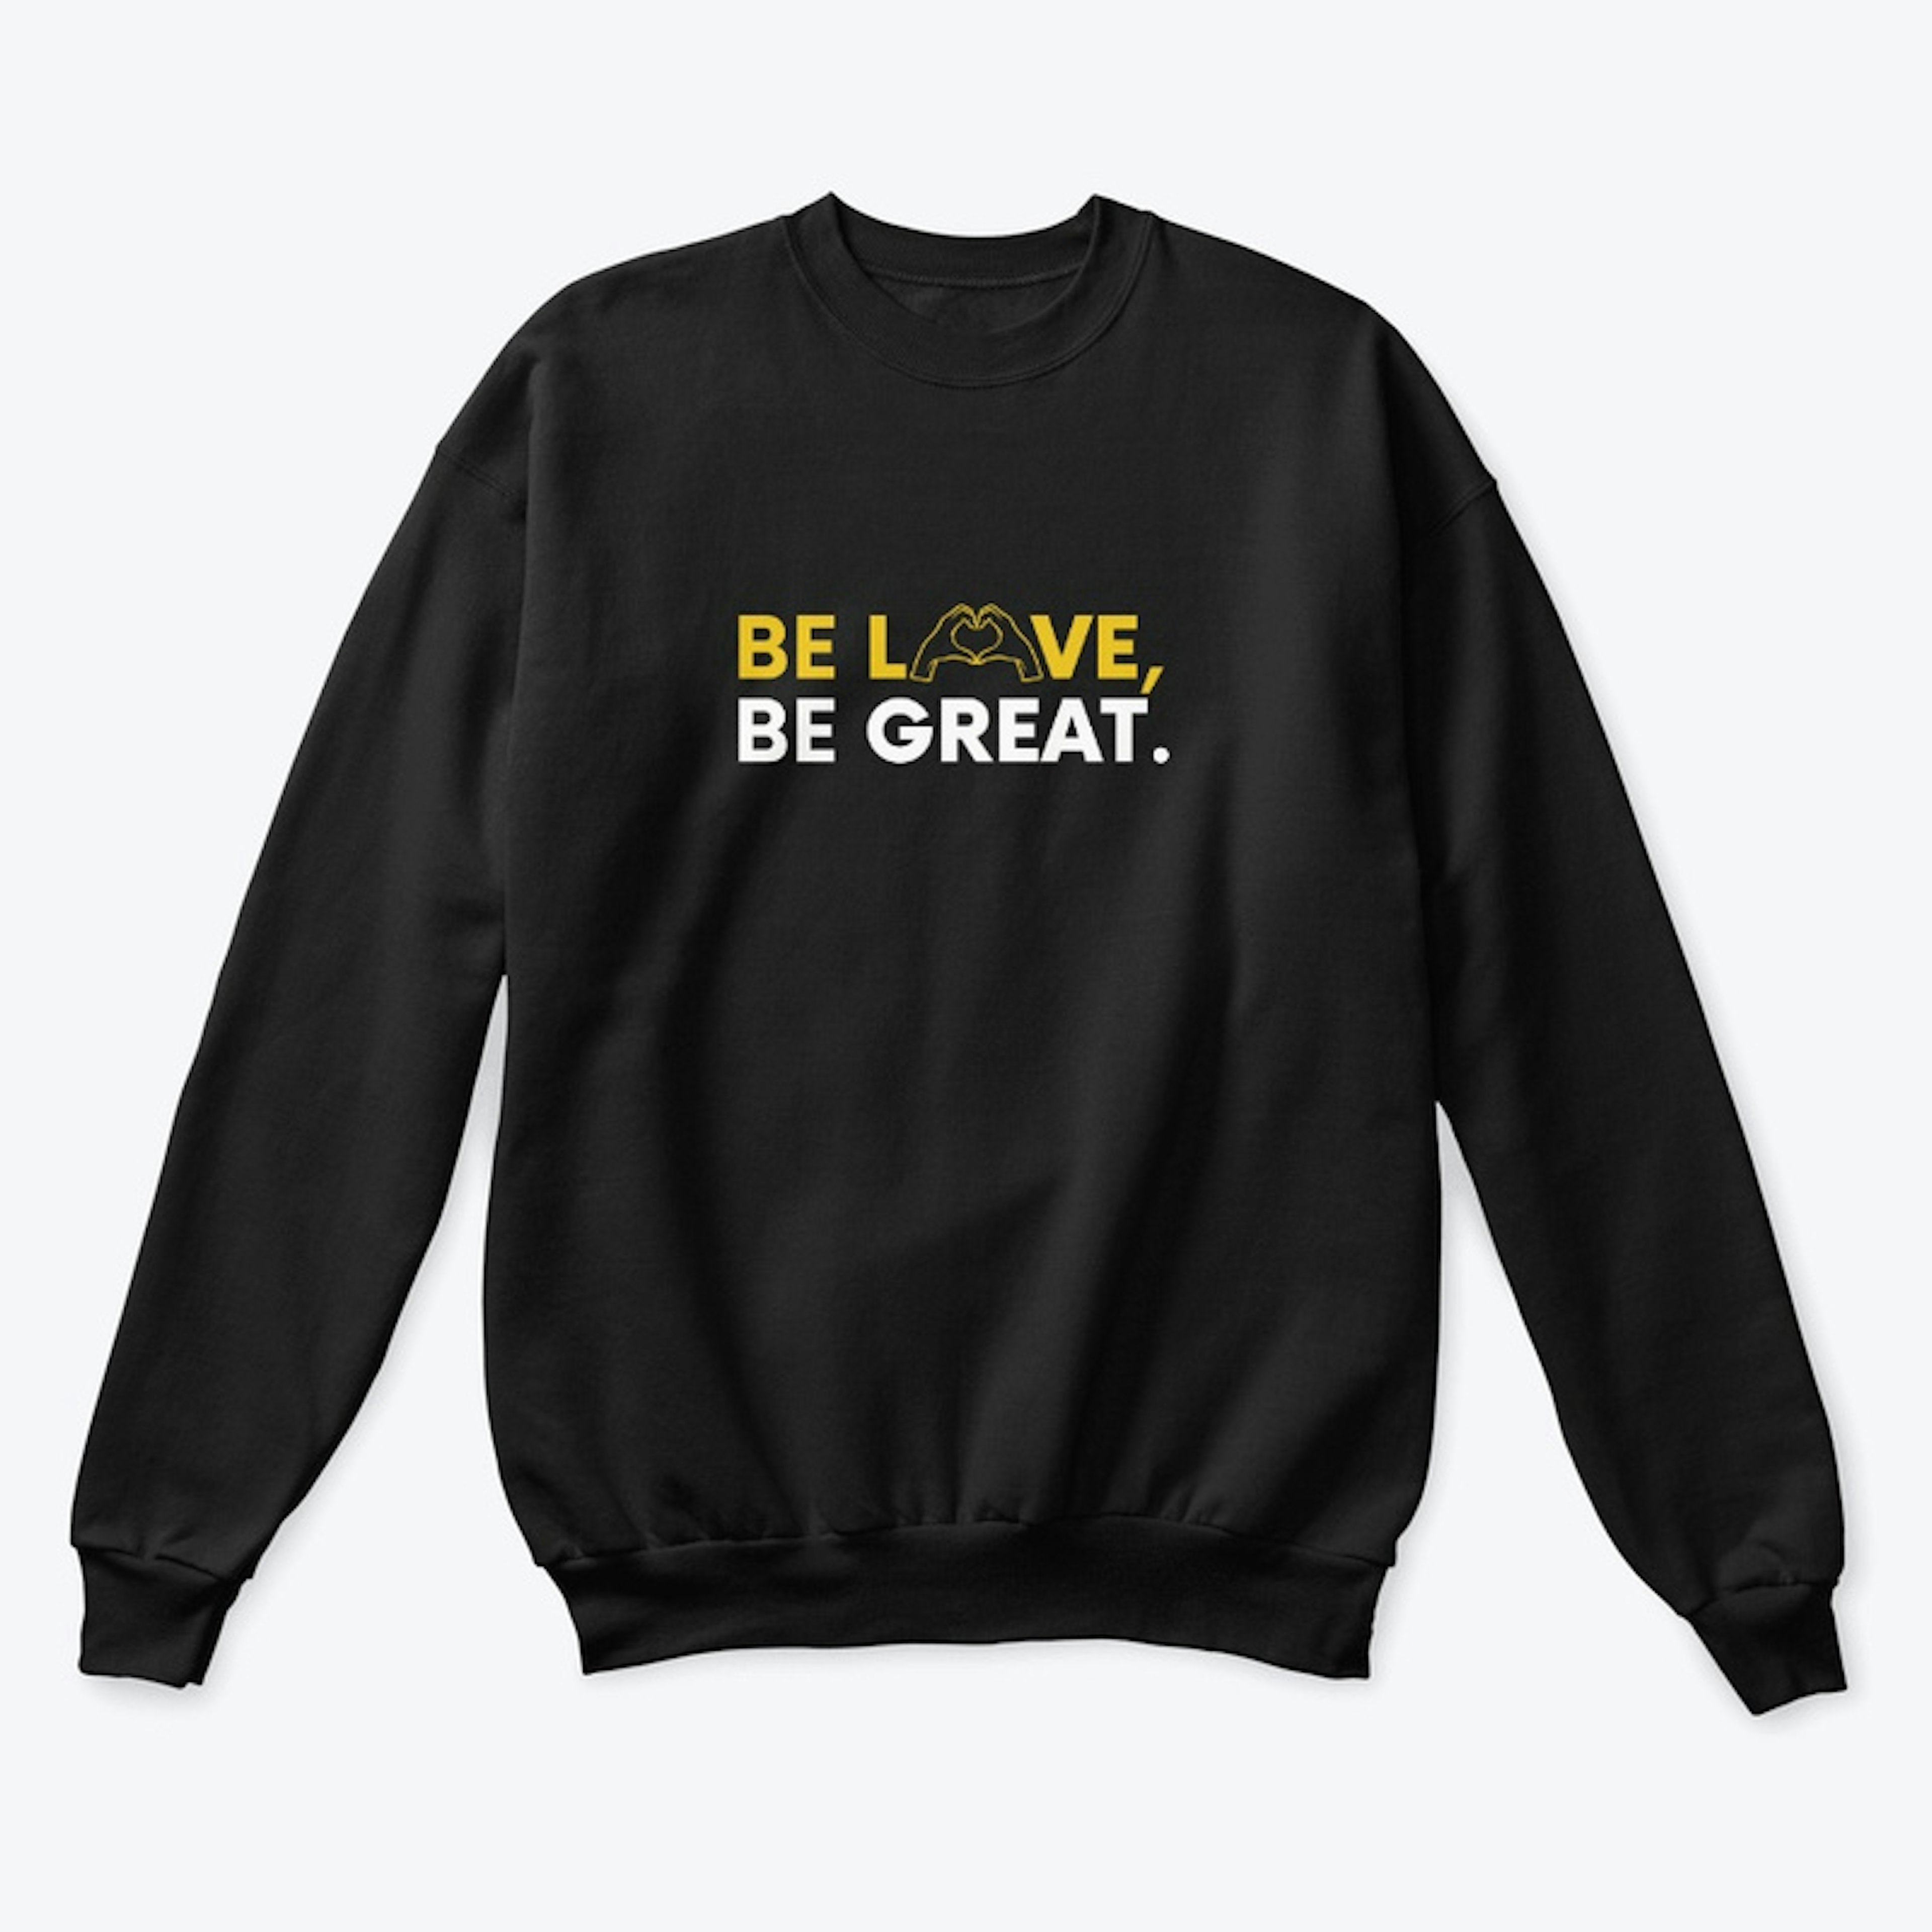 Be Love, Be Great - Crewneck